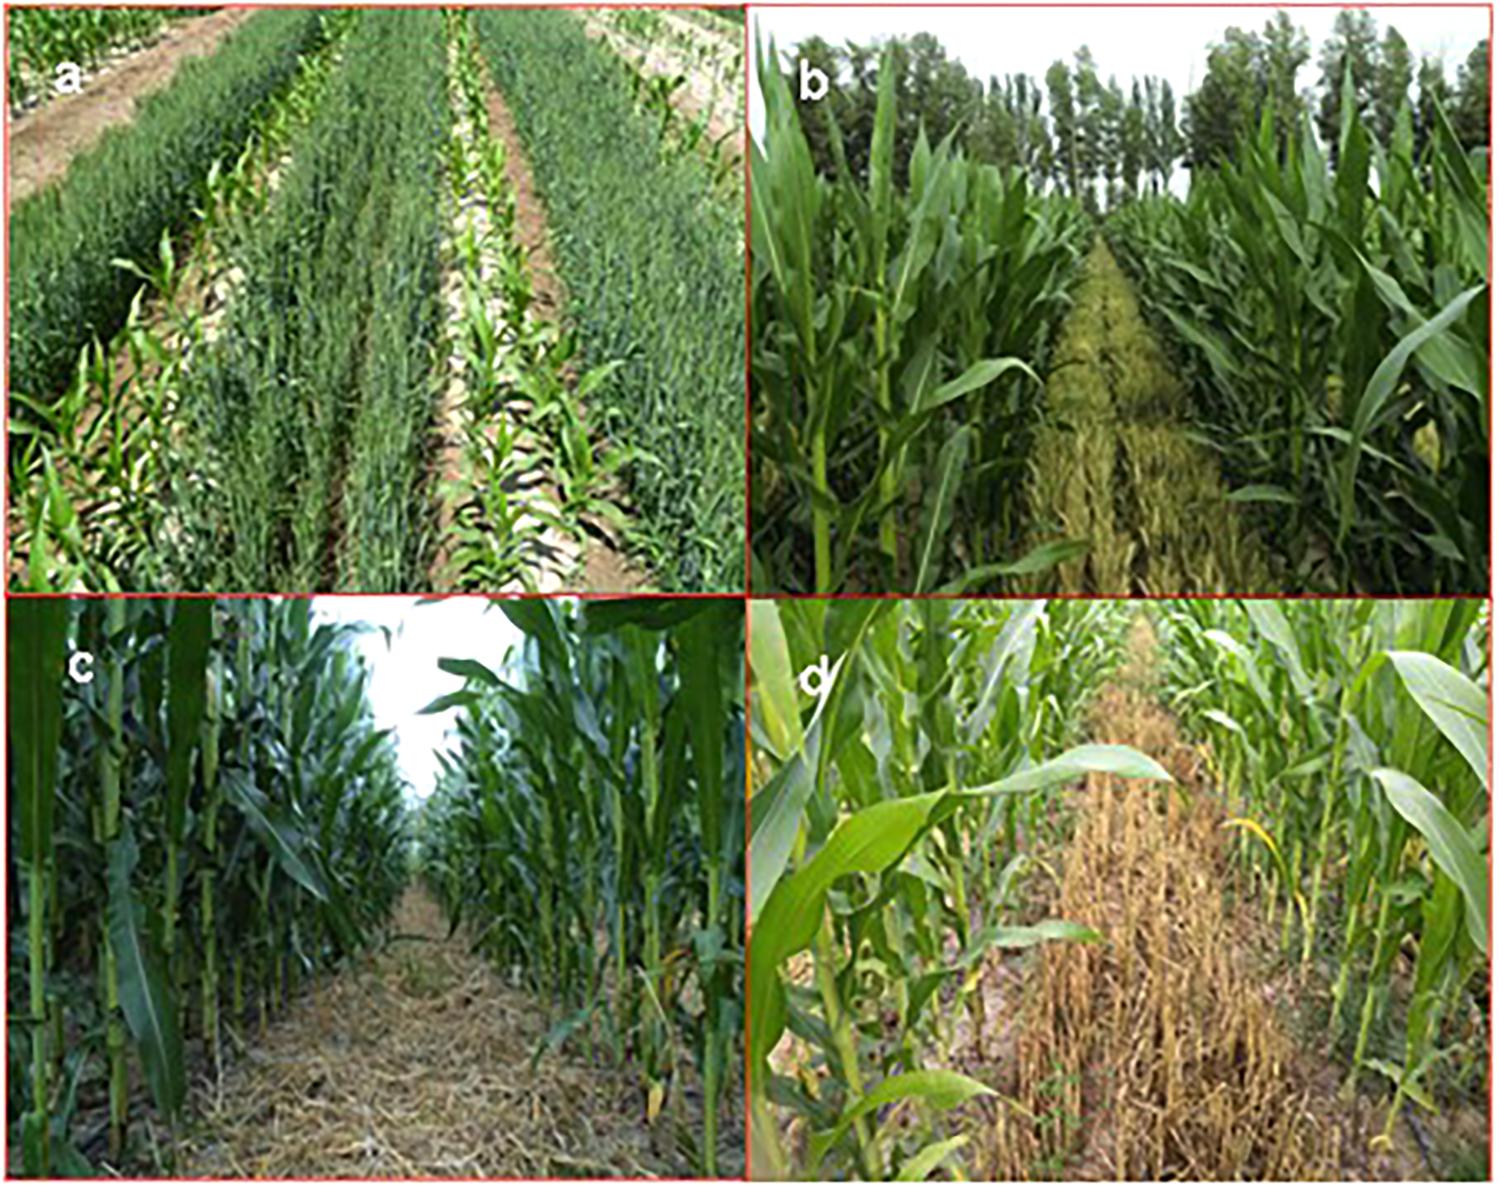 | Wheat-Maize Intercropping With Reduced Tillage and Straw Retention: A Step Enhancing Economic Environmental Benefits Arid Areas